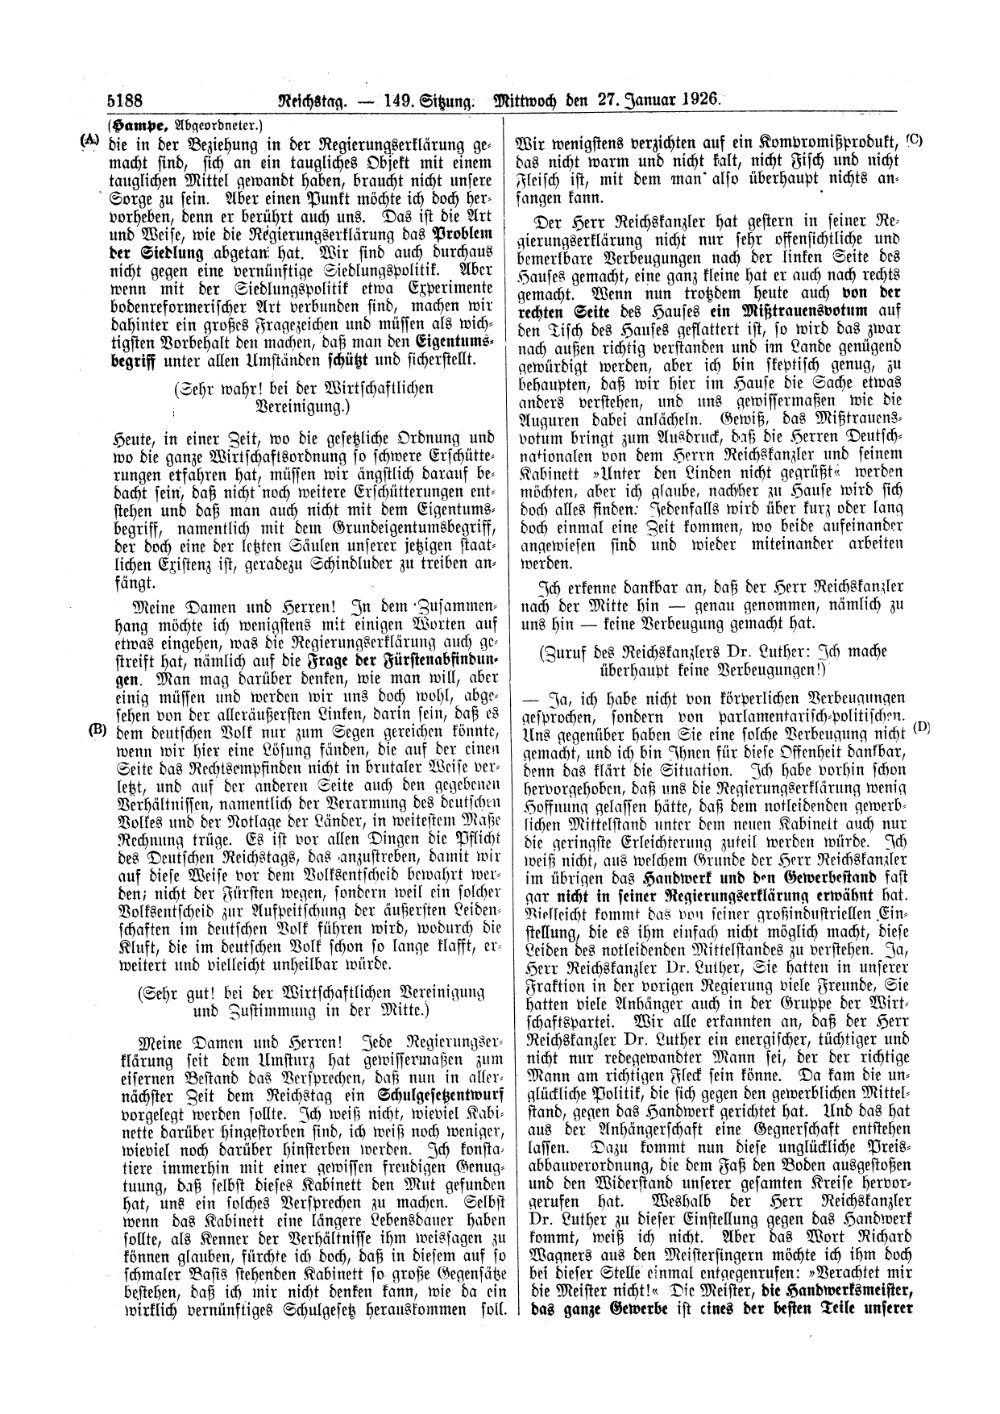 Scan of page 5188